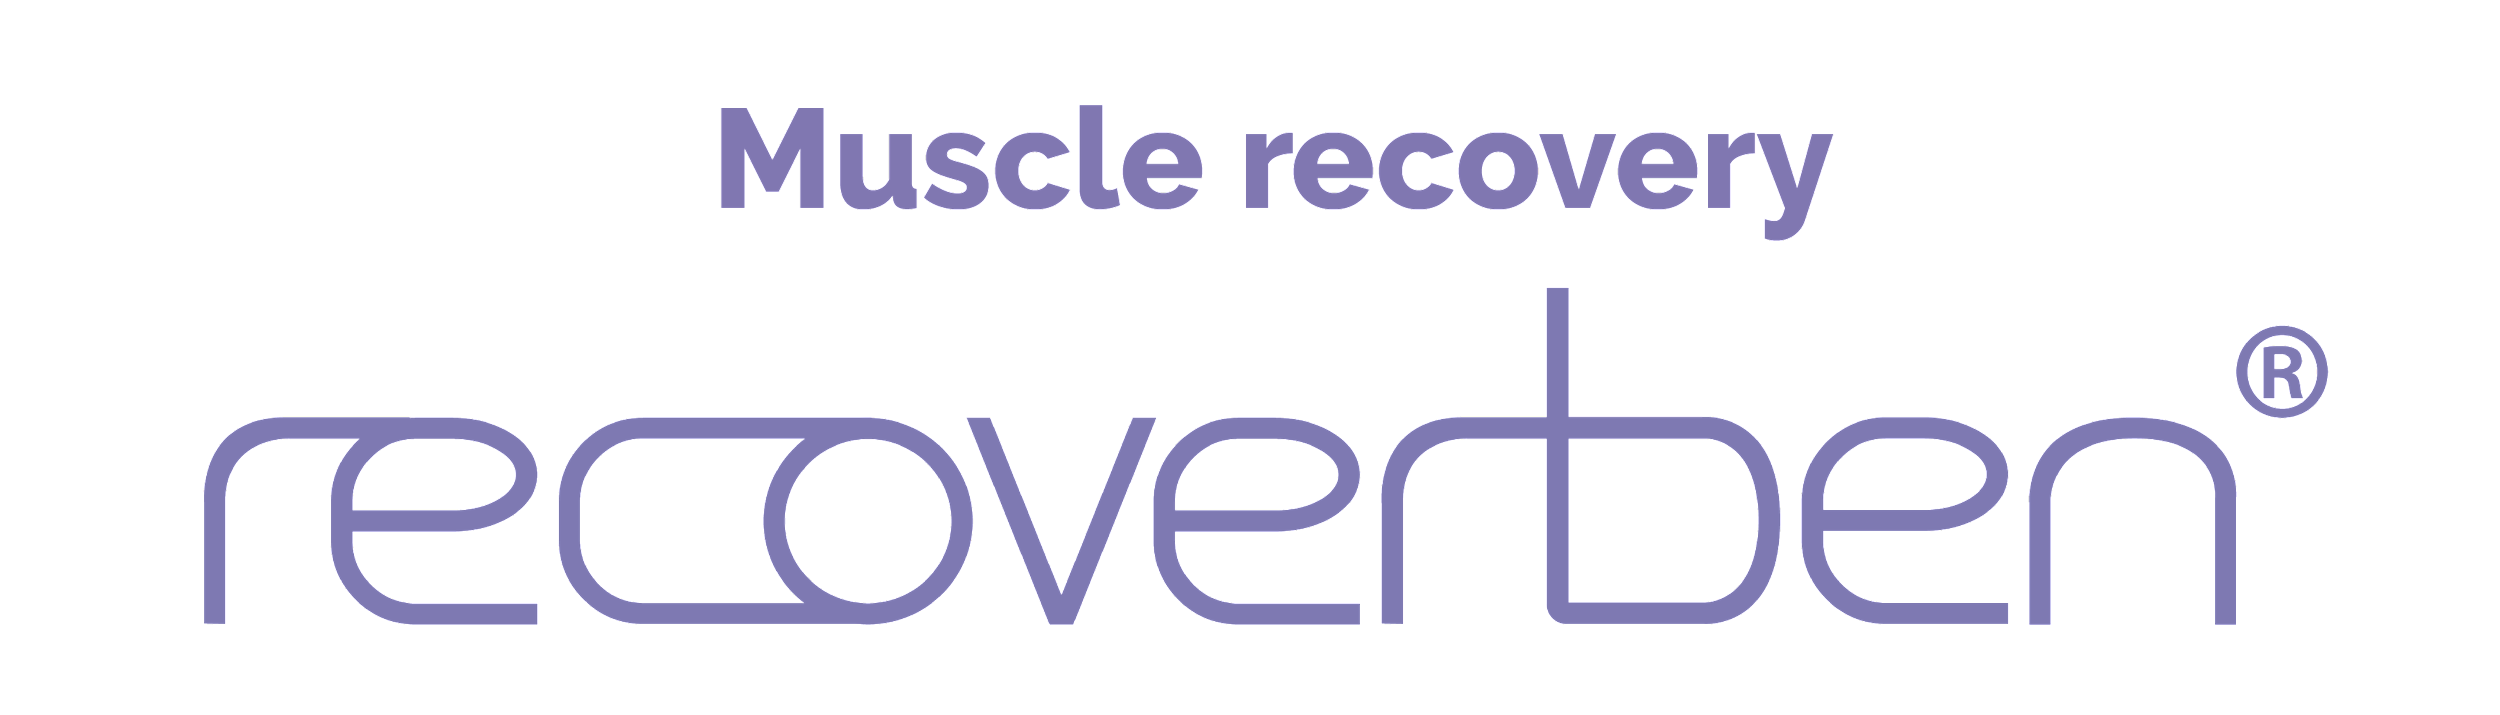 Muscle recovery